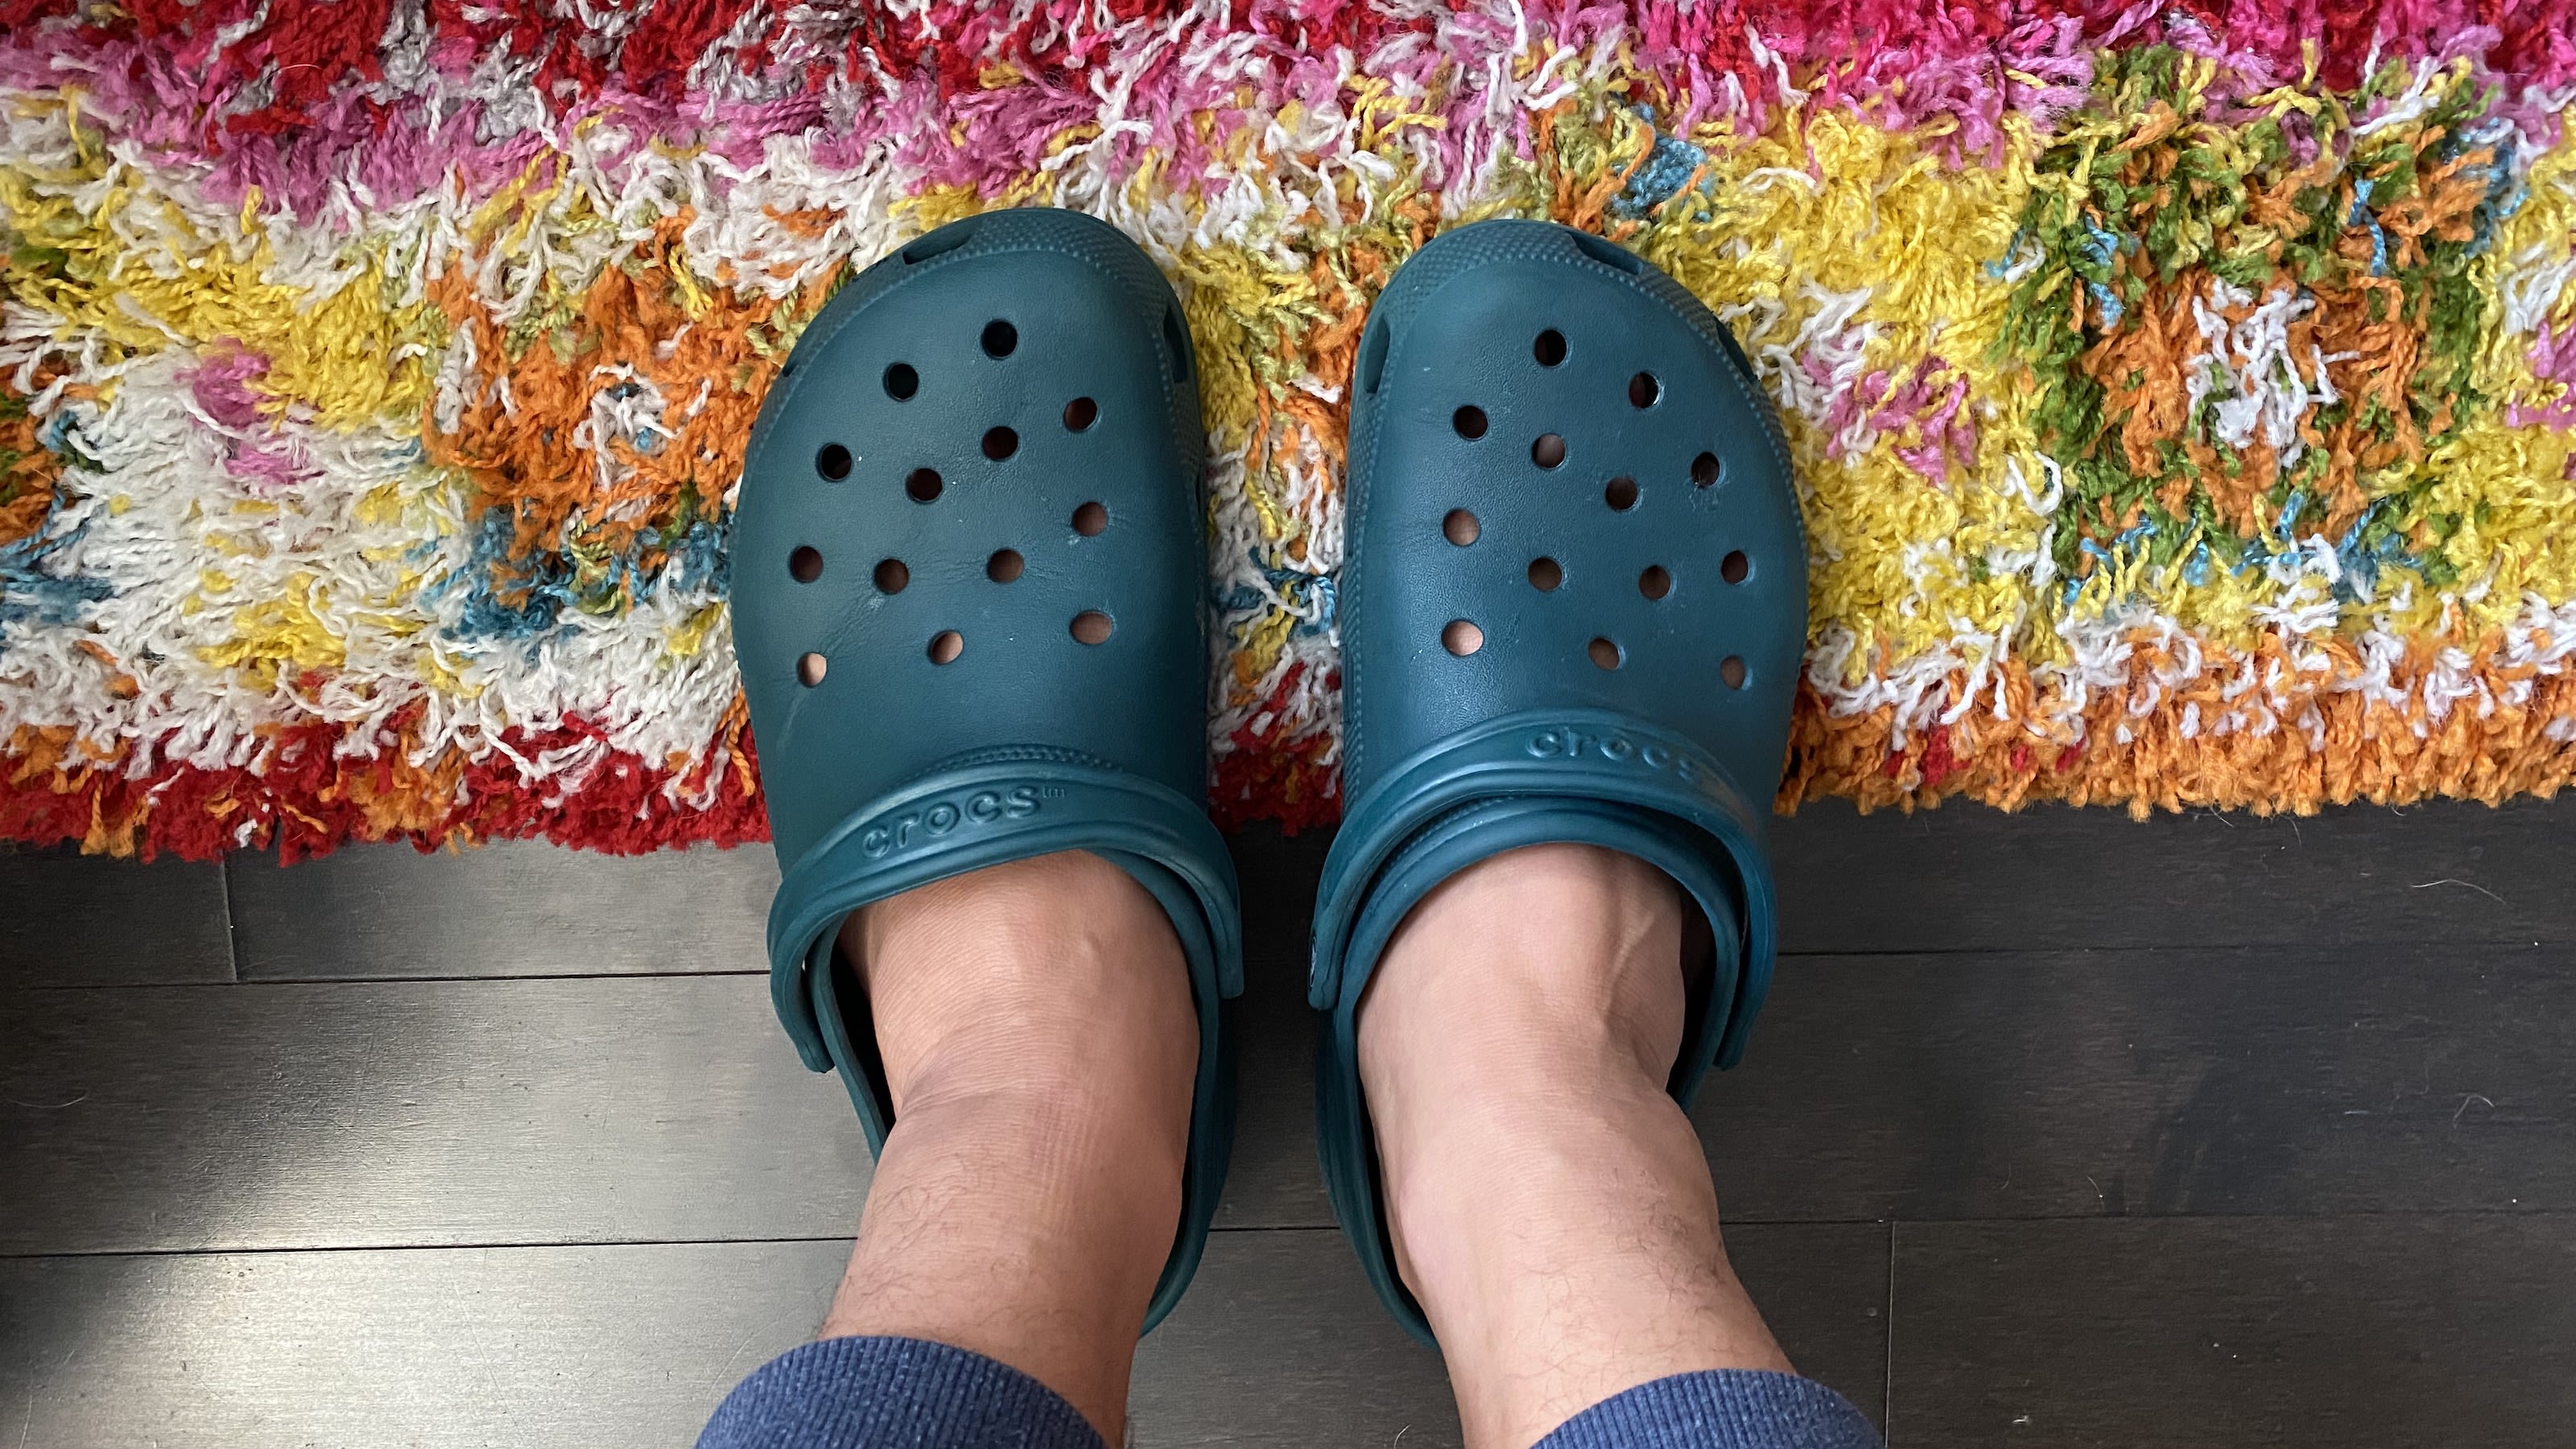 Encyclopedia Let patologisk Why Crocs may be the best shoe for traveling in 2023 | CNN Underscored